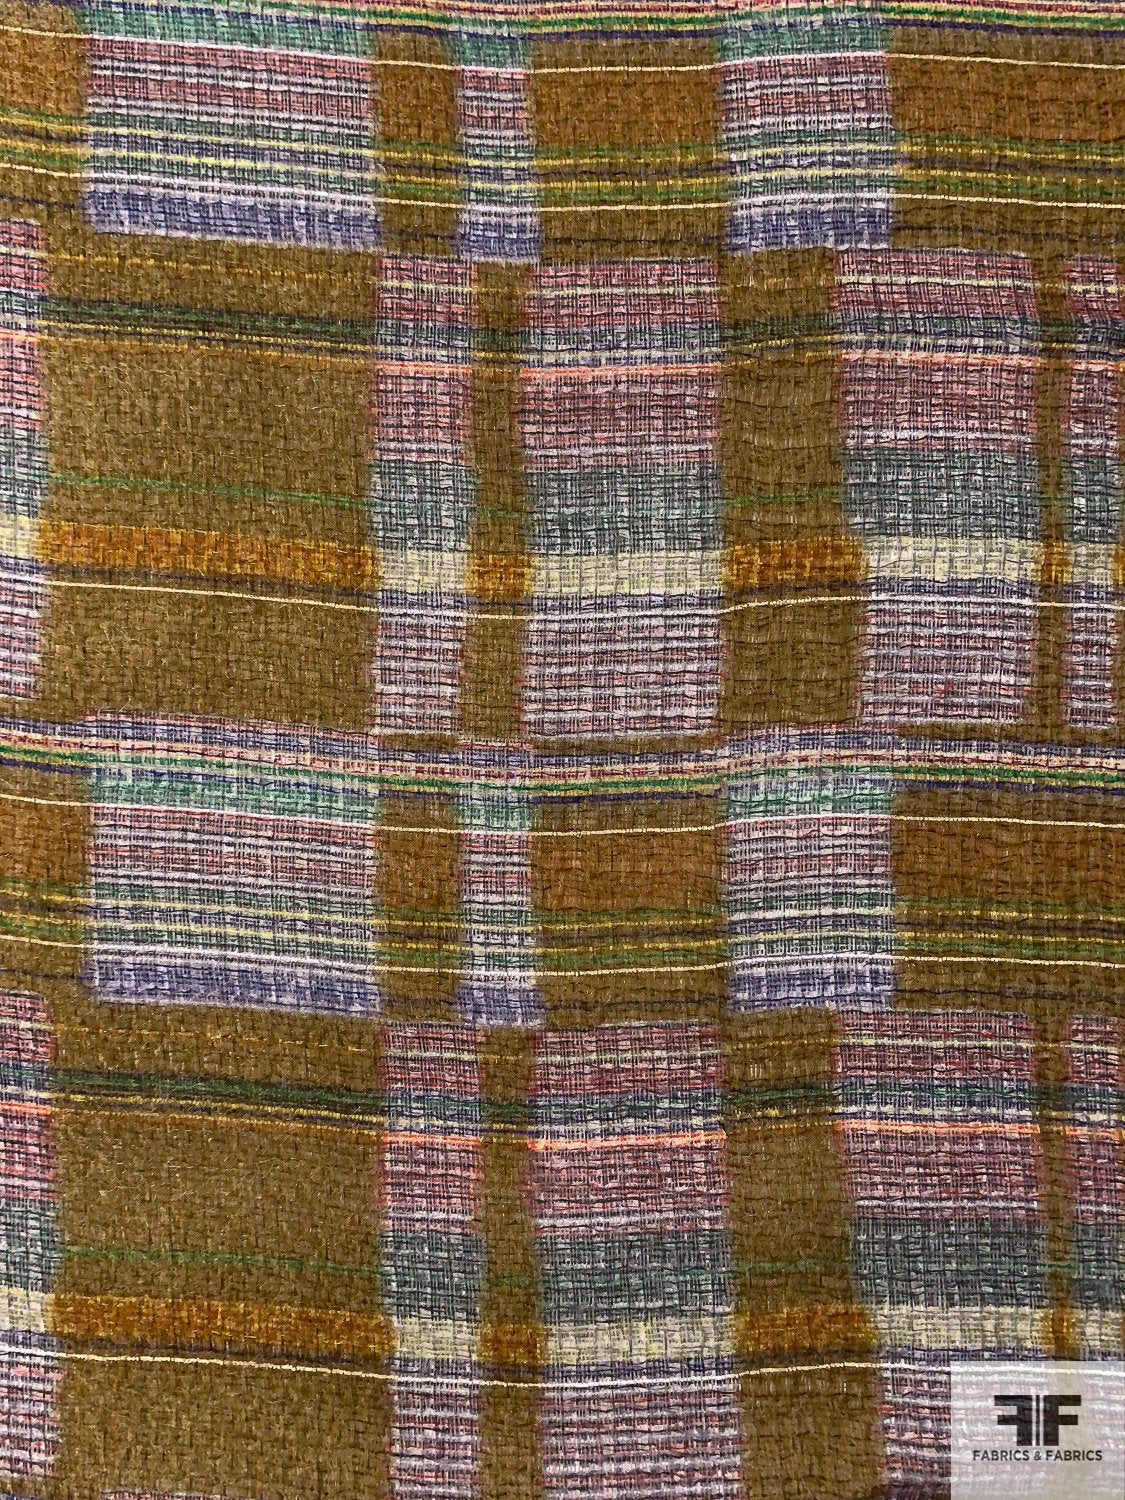 Orson Gygi - The dish cloth. A simple small square of fabric ready